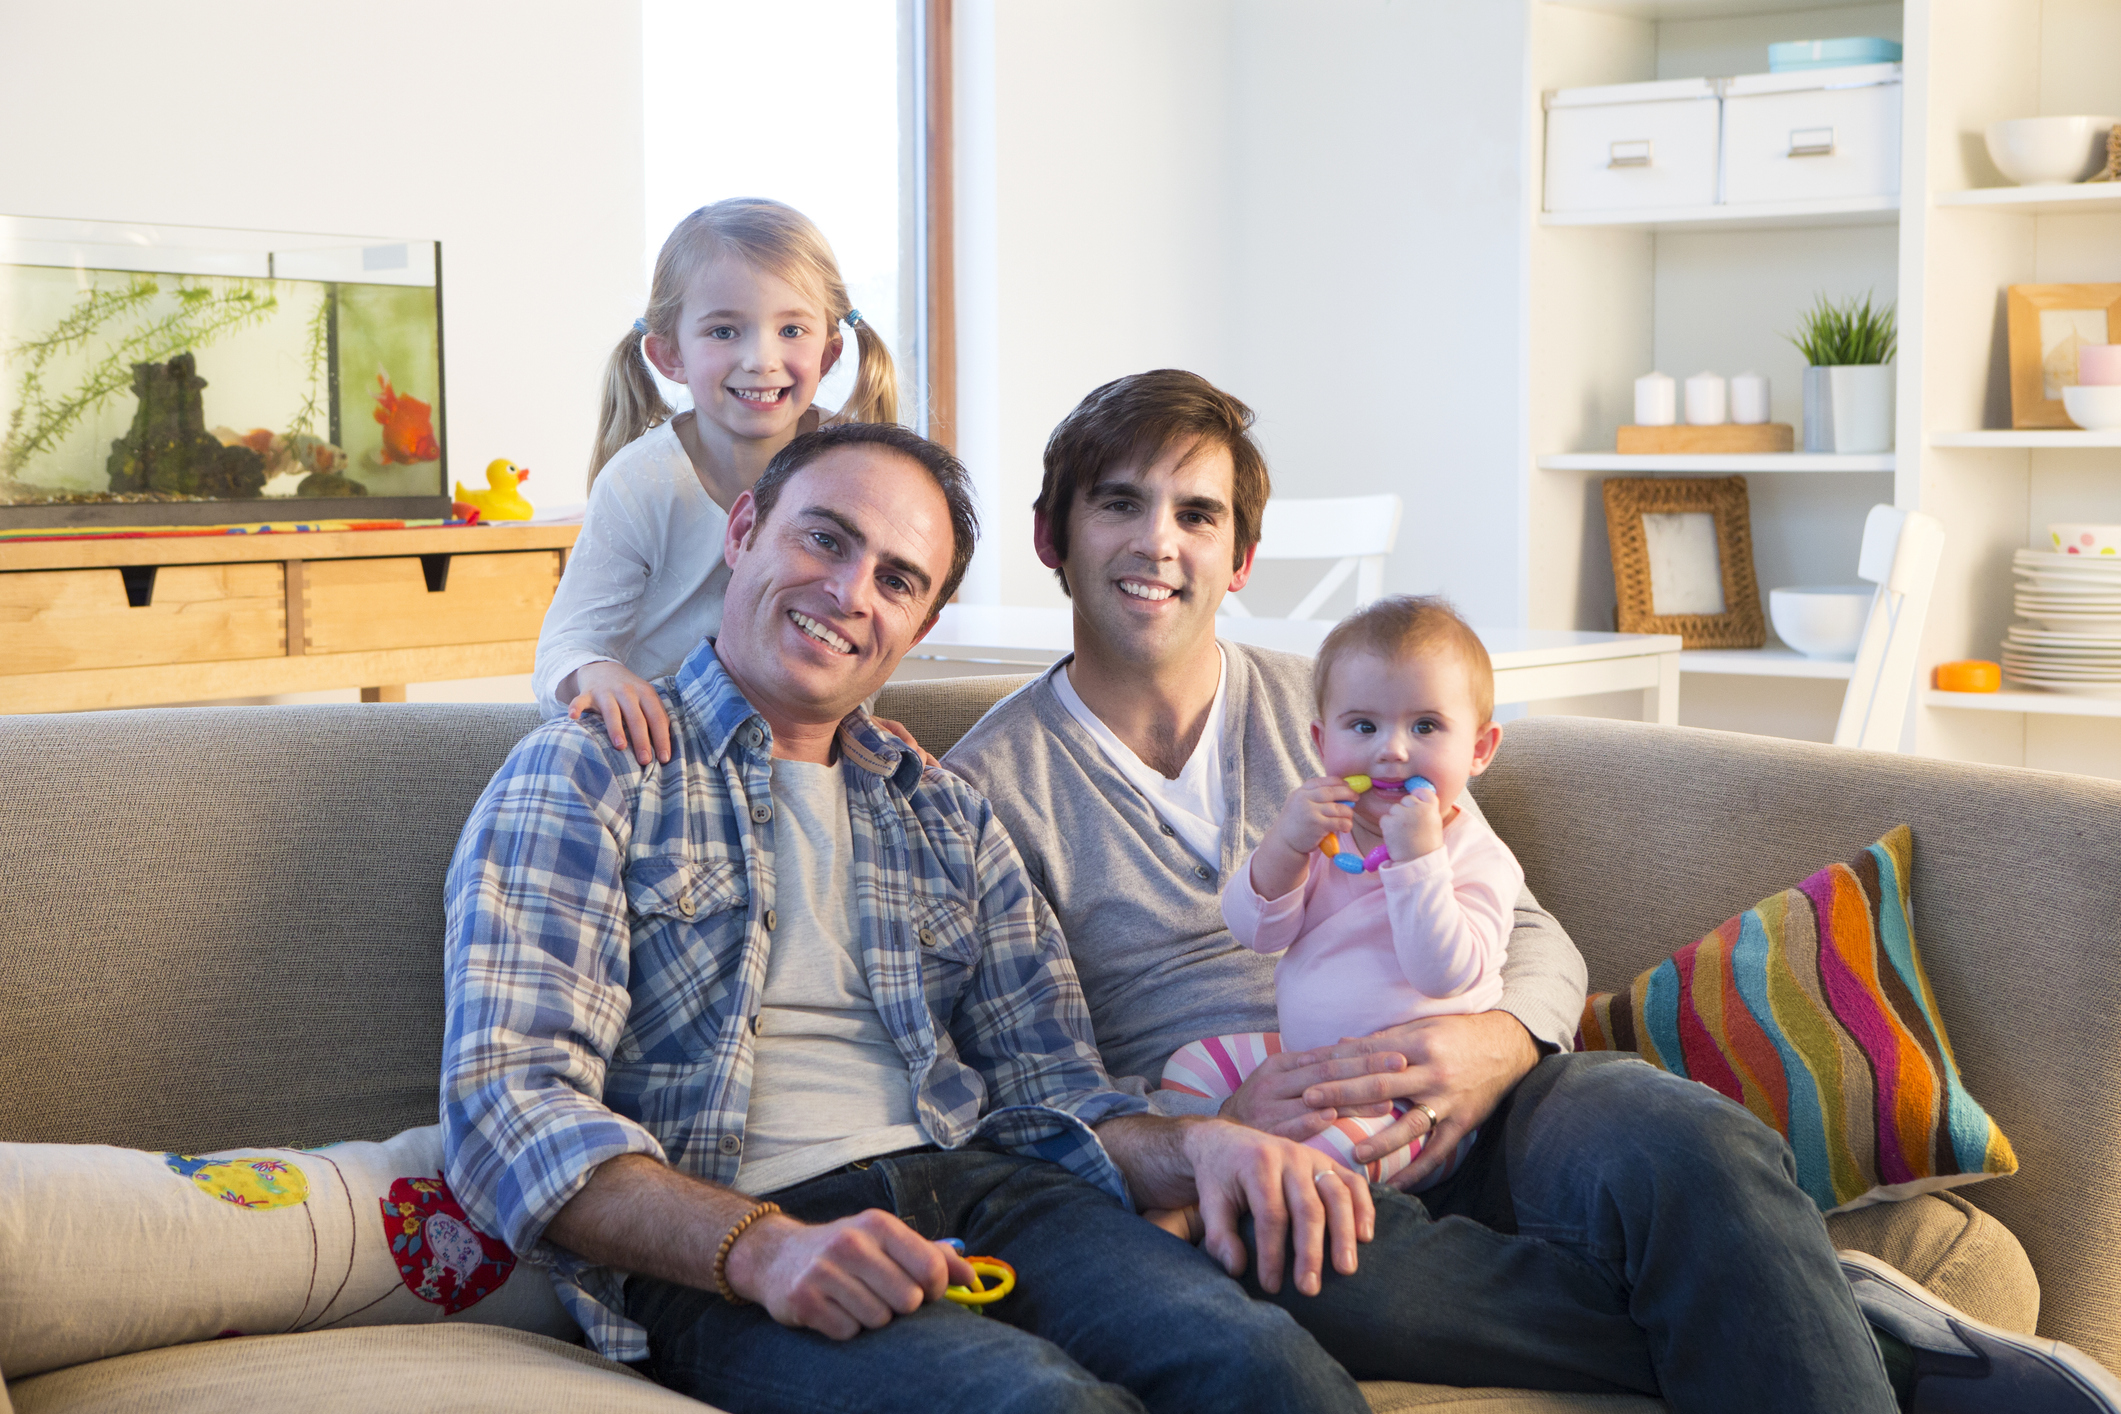 Woman and man sitting on couch with two small children smiling